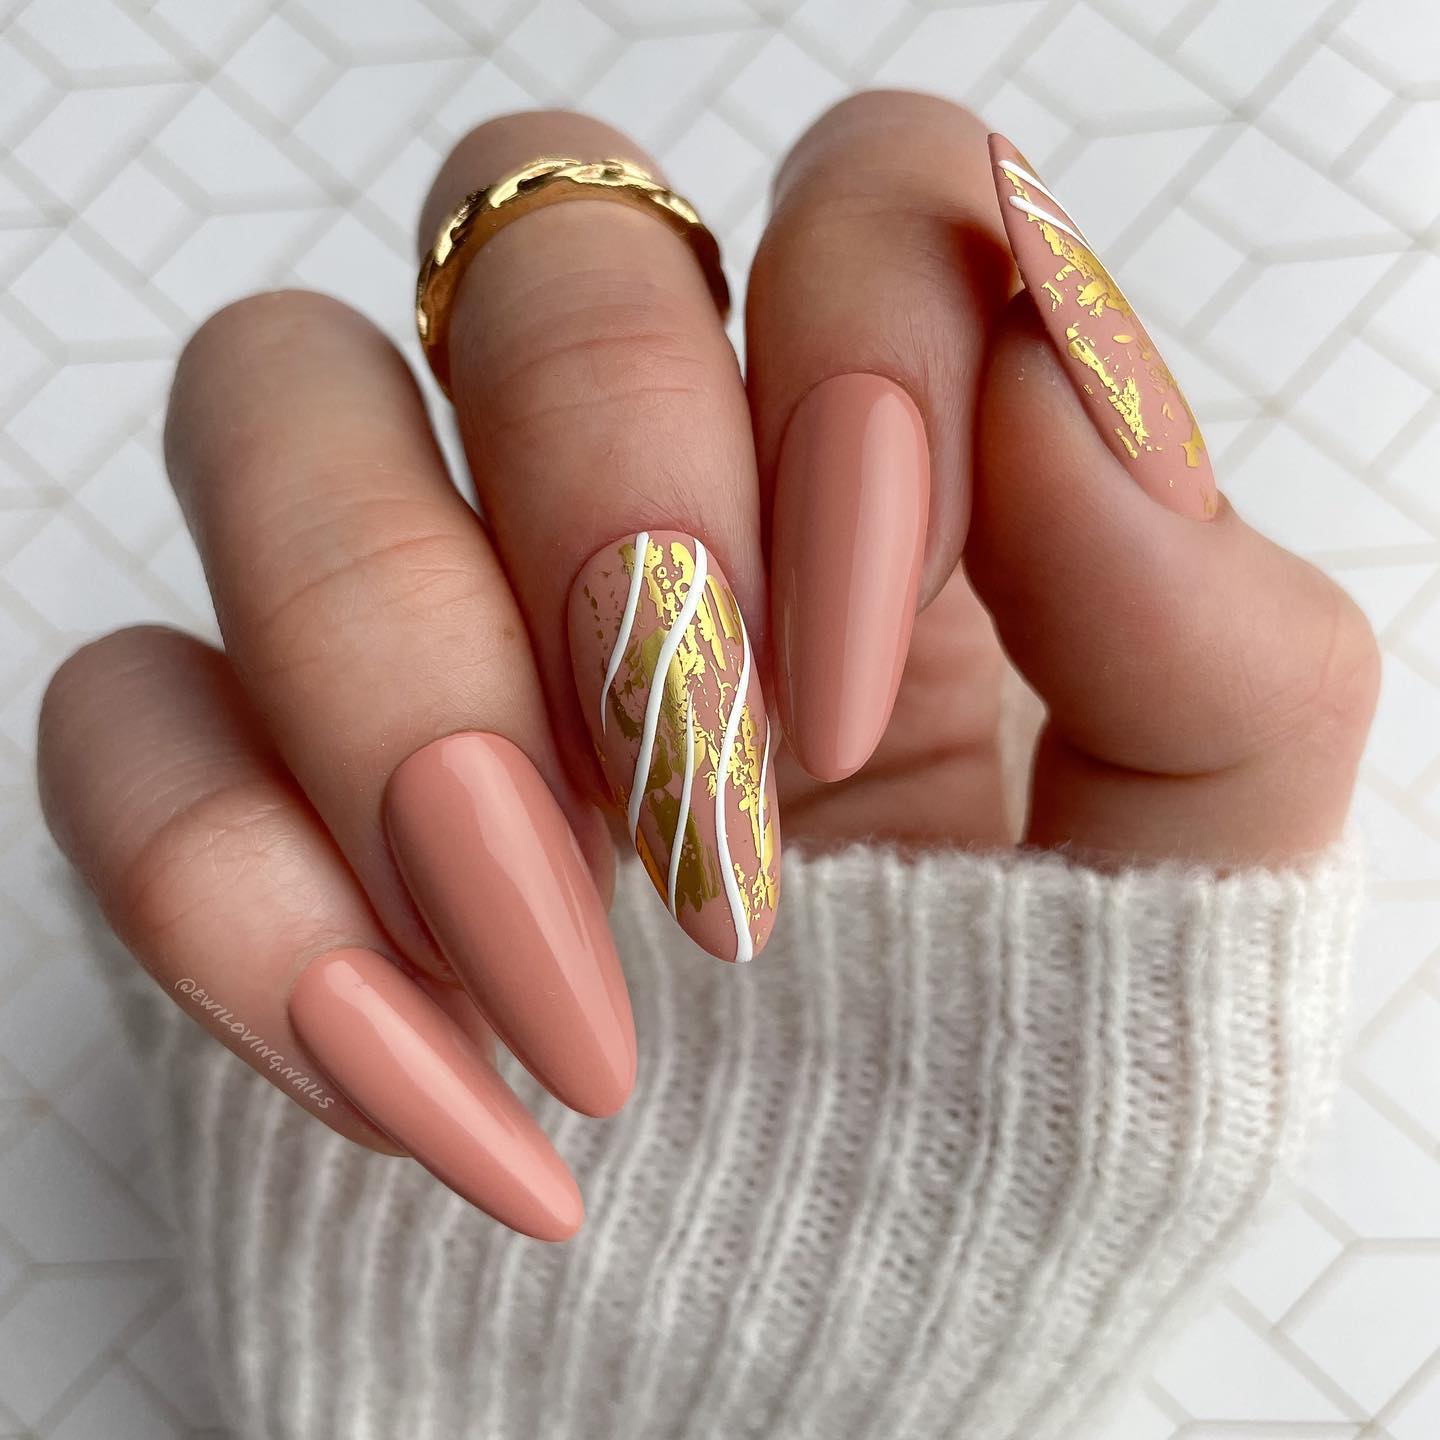 Long Round Beige Nails with White Swirls and Golden Foil